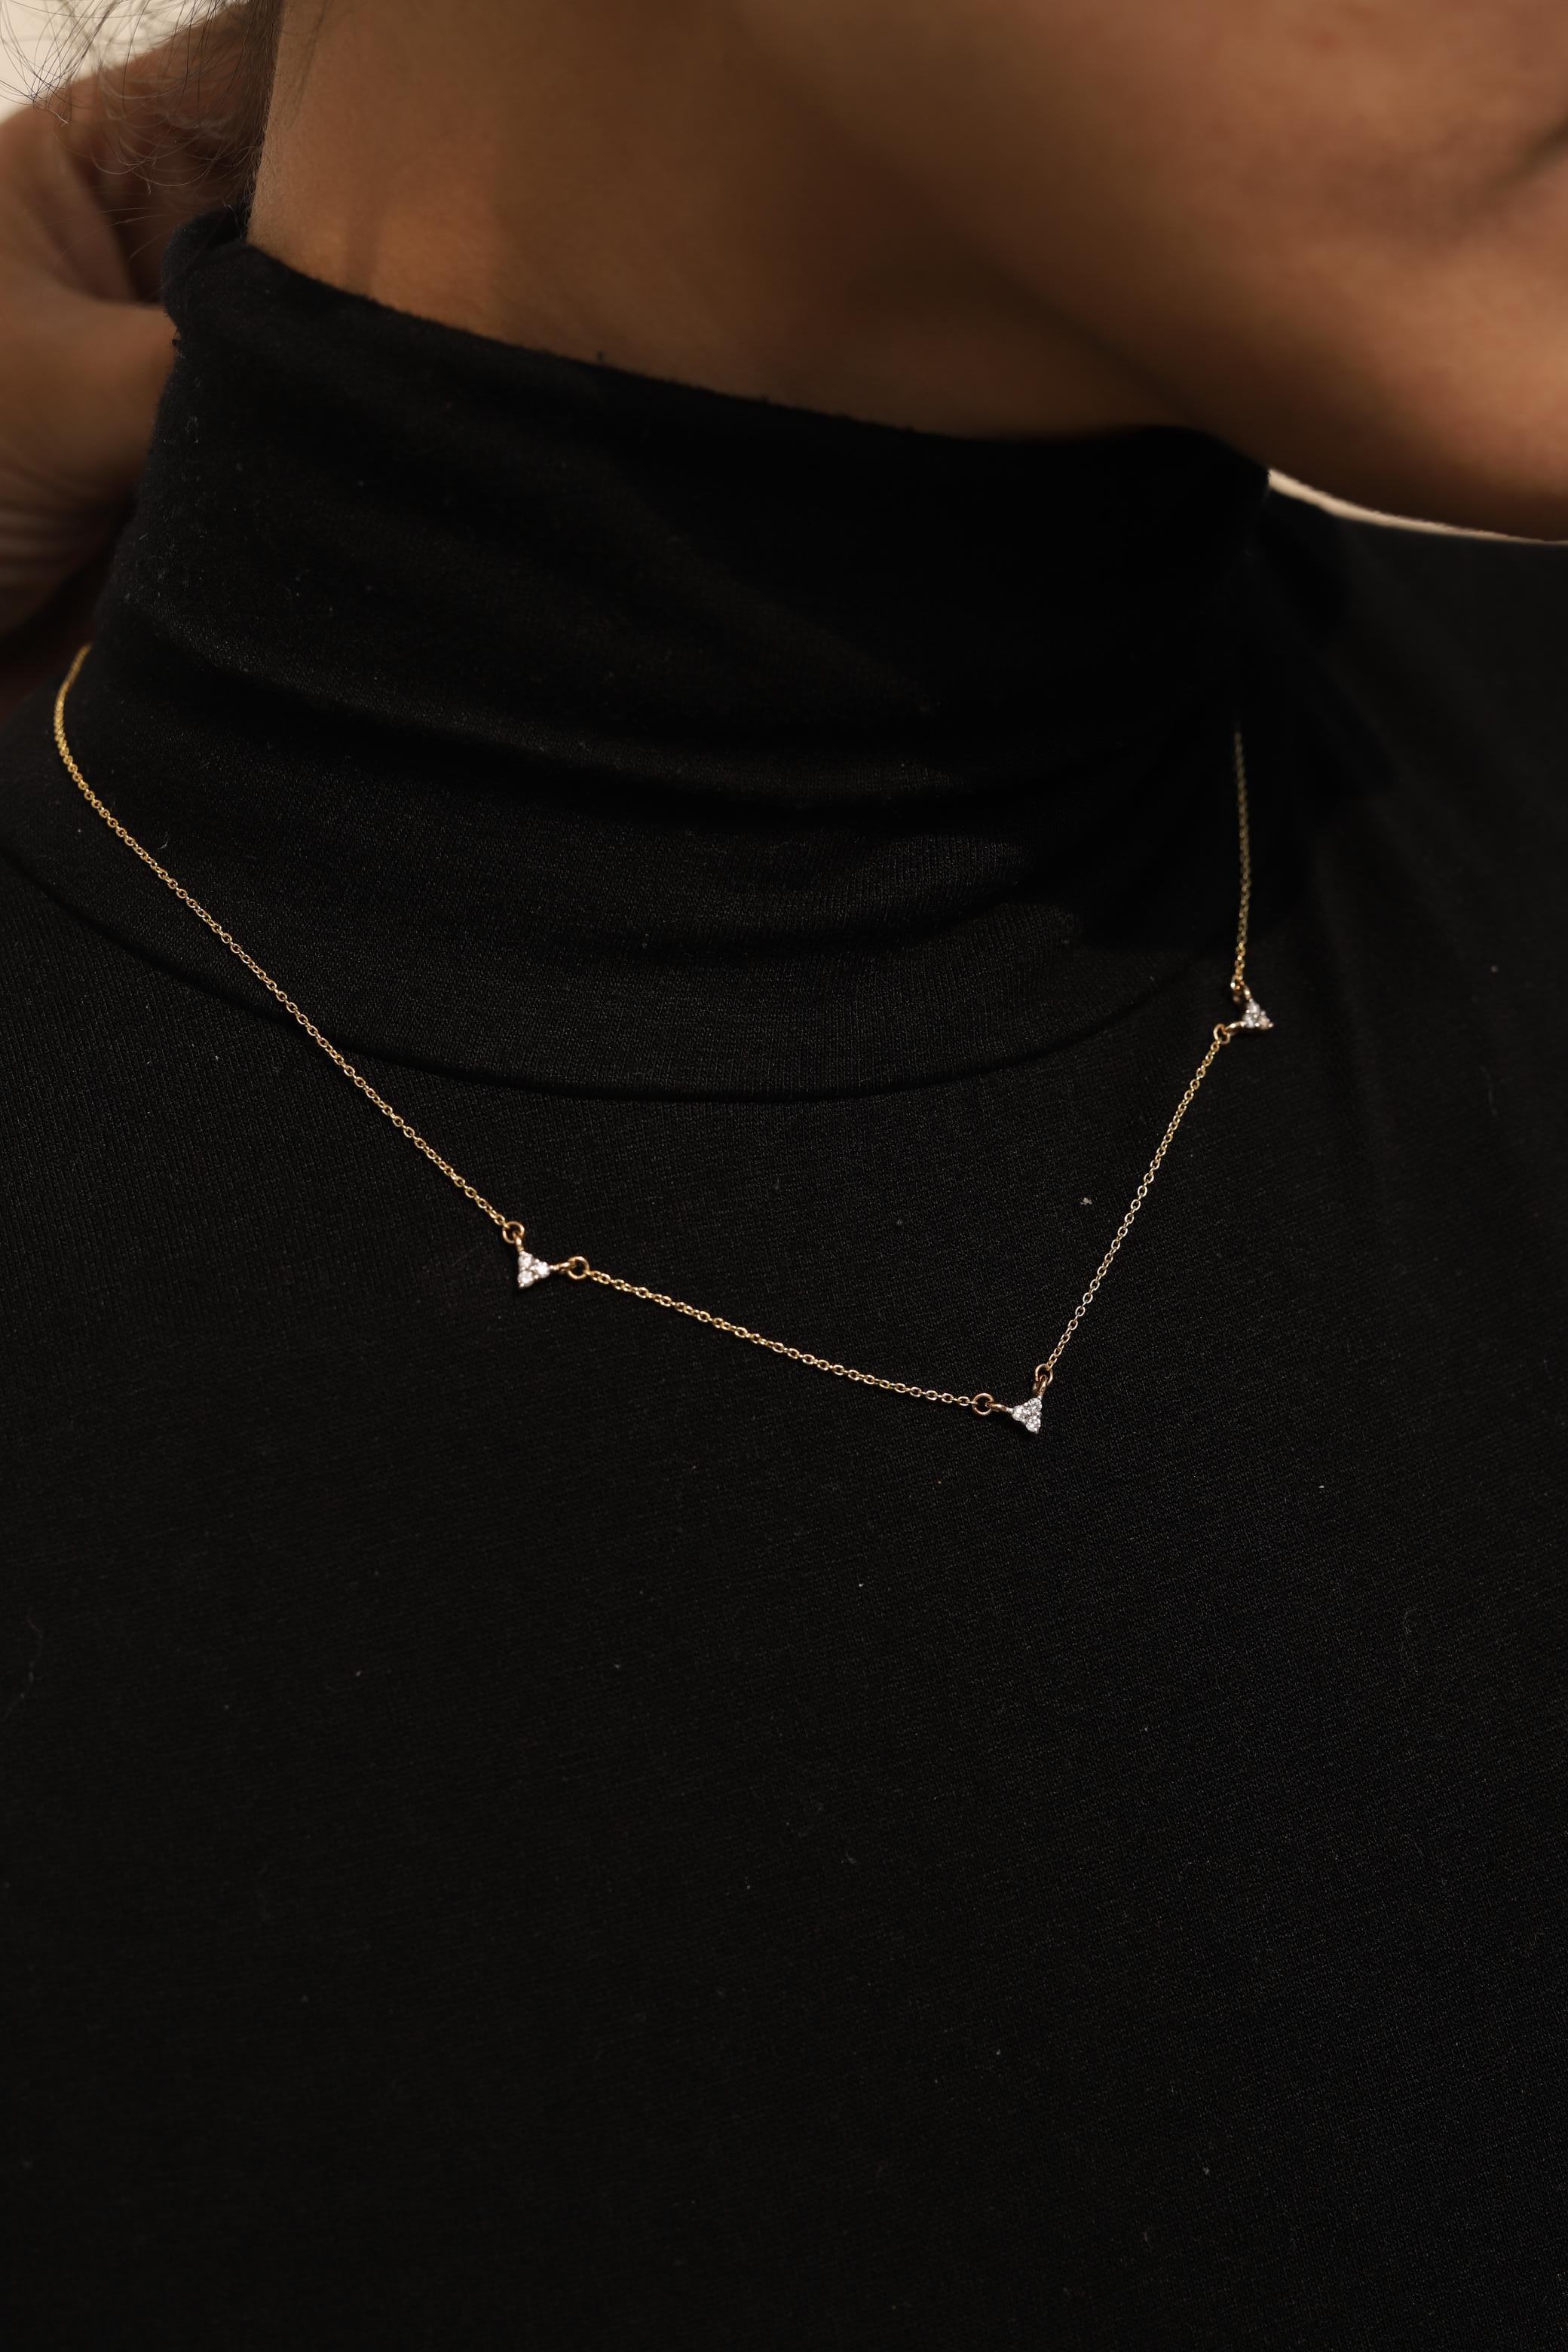 Minimalist Diamond Chain Necklace in 14K Gold studded with round cut diamond. This stunning piece of jewelry instantly elevates a casual look or dressy outfit. 
April birthstone diamond brings love, fame, success and prosperity.
Designed with three